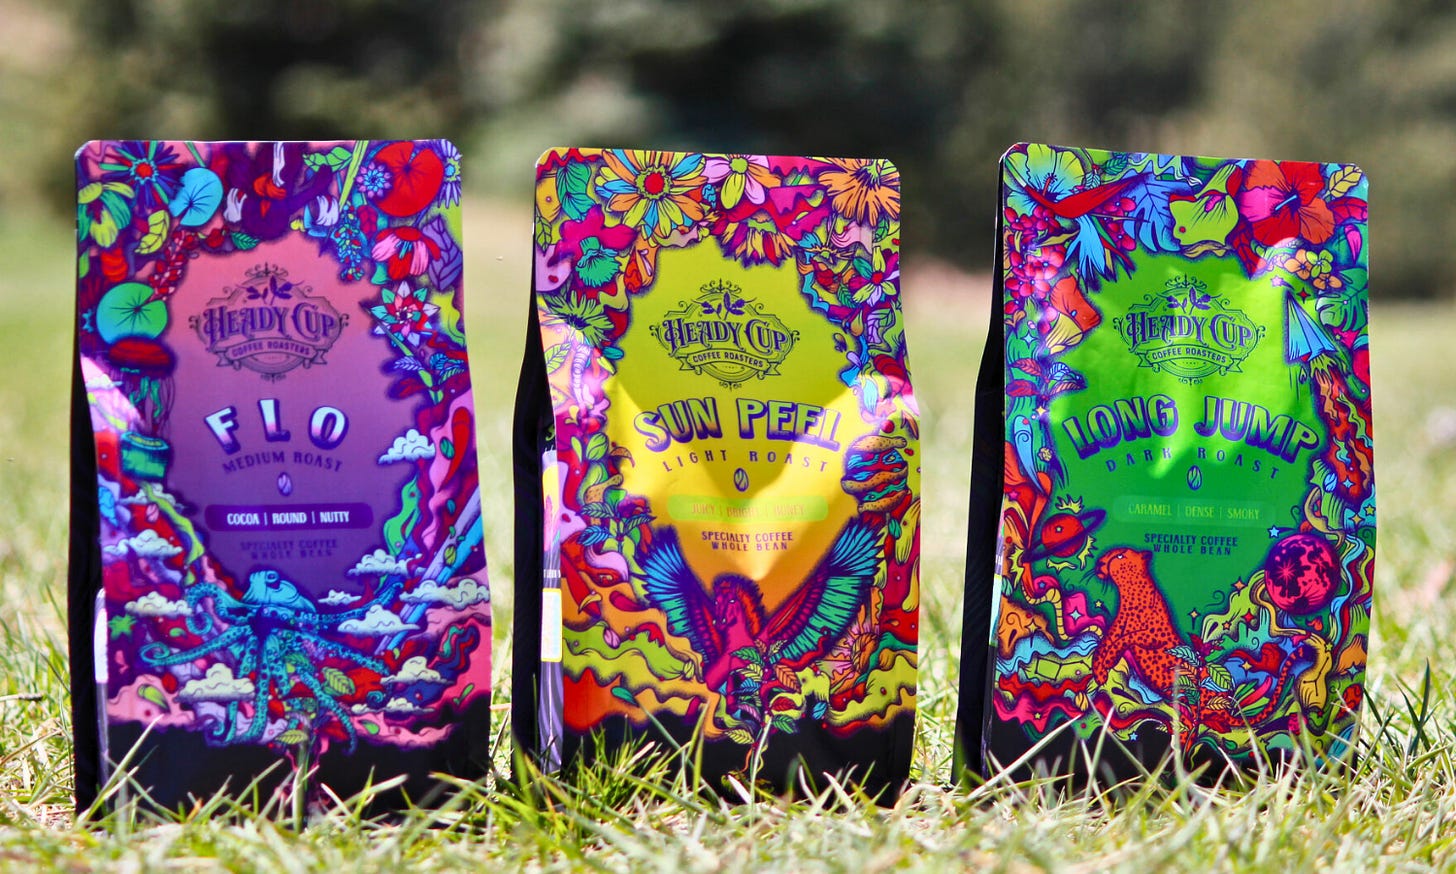 Three 1970s inspired colorful floral and animal print designs on coffee bags sitting in the grass.